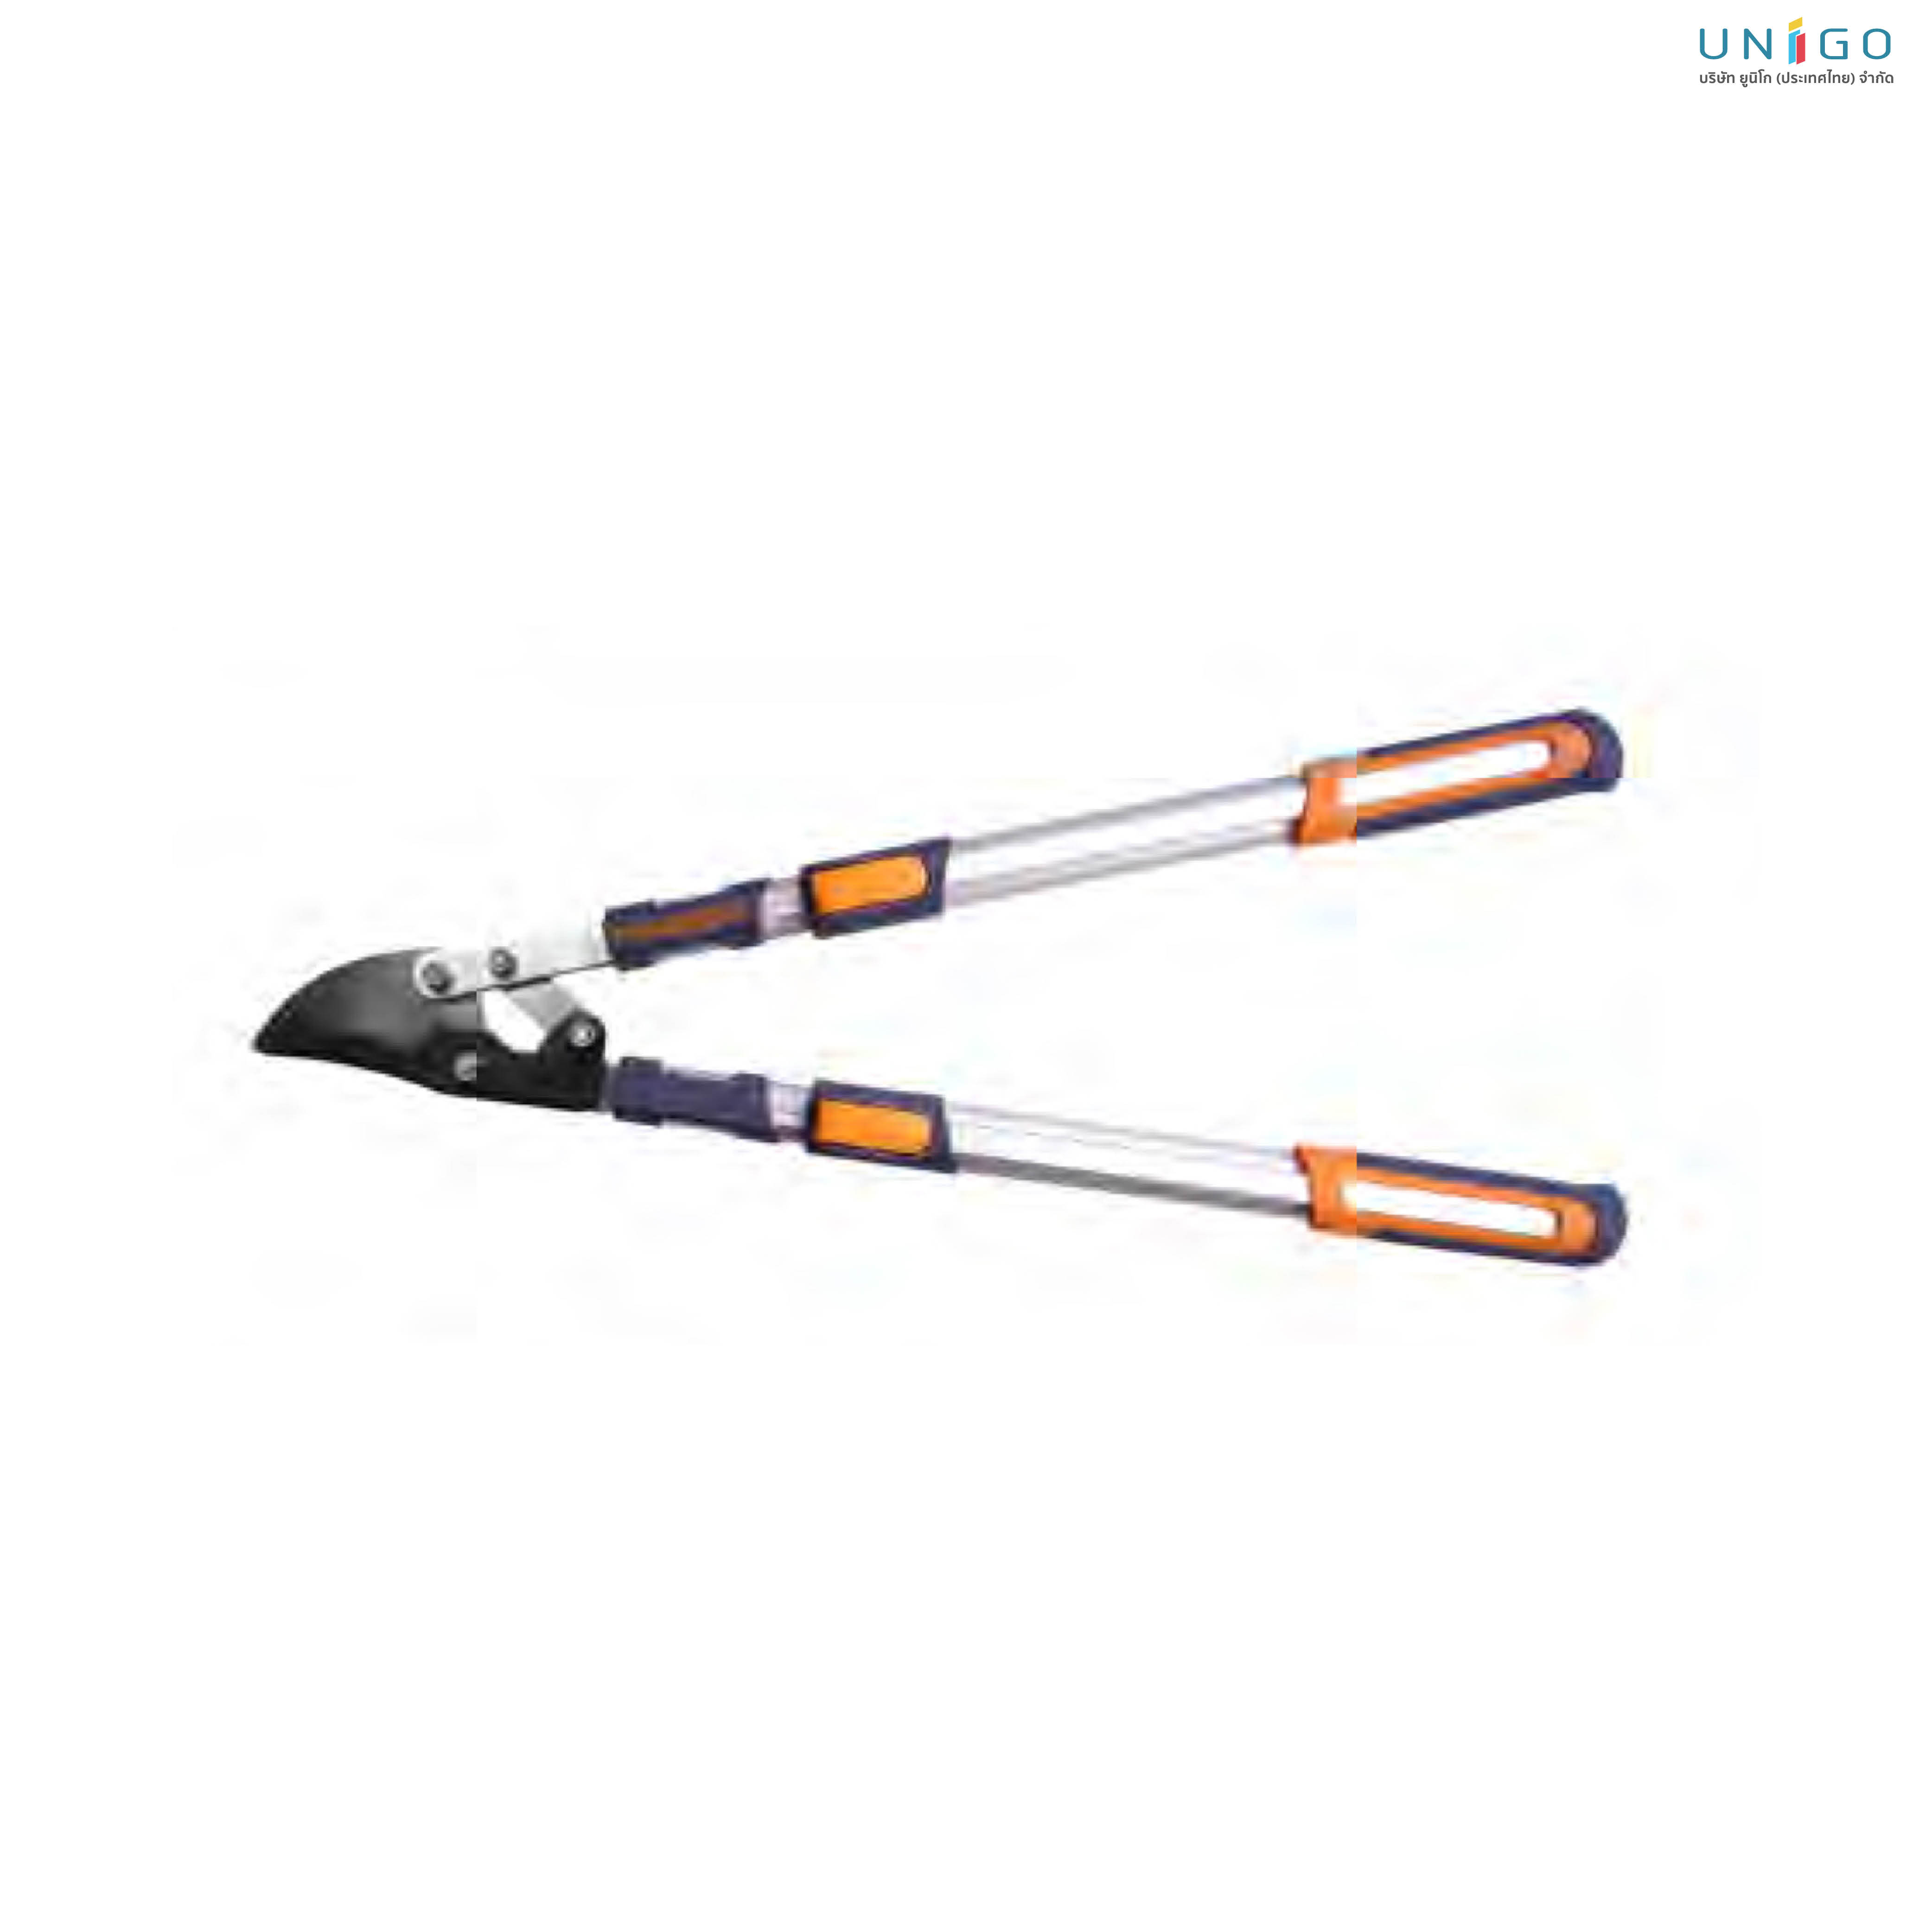 TELESCOPIC COMPOUND BYPASS LOPPER